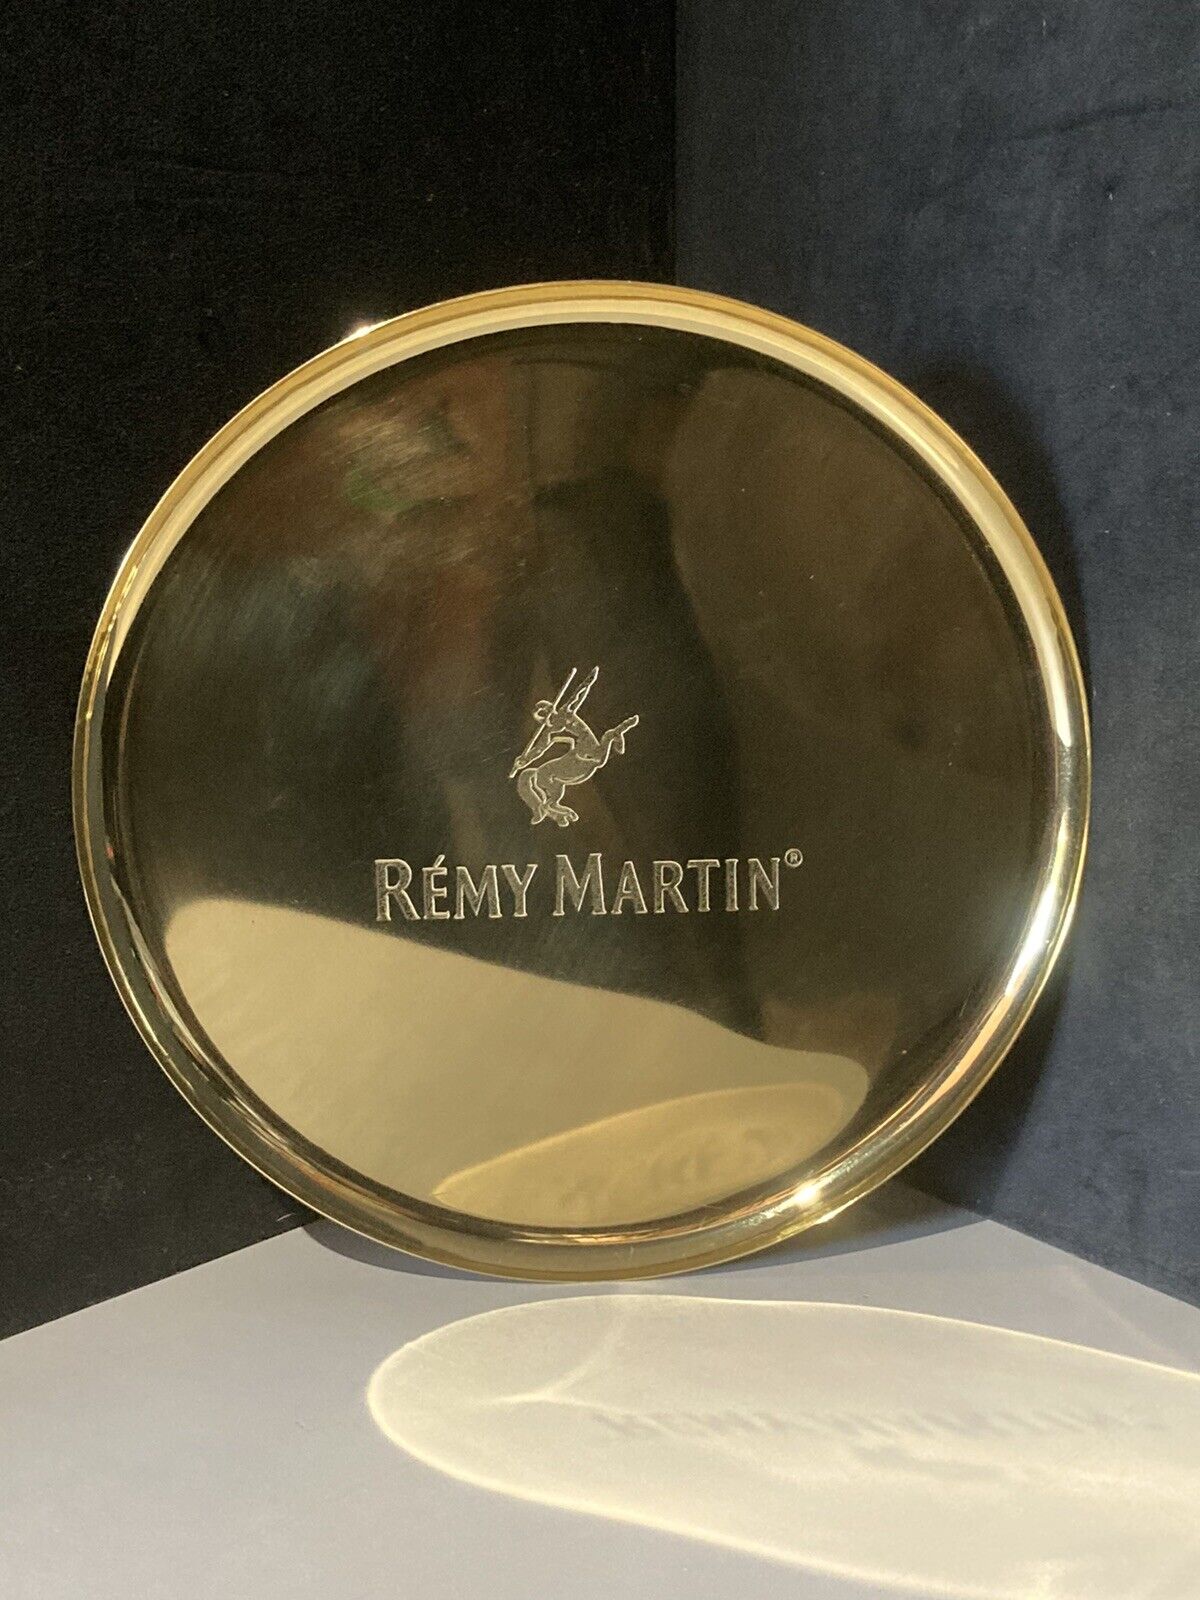 Rare NEW Remy Martin Cognac Bottle Gold Serving Tray For Louis XIII Glasses